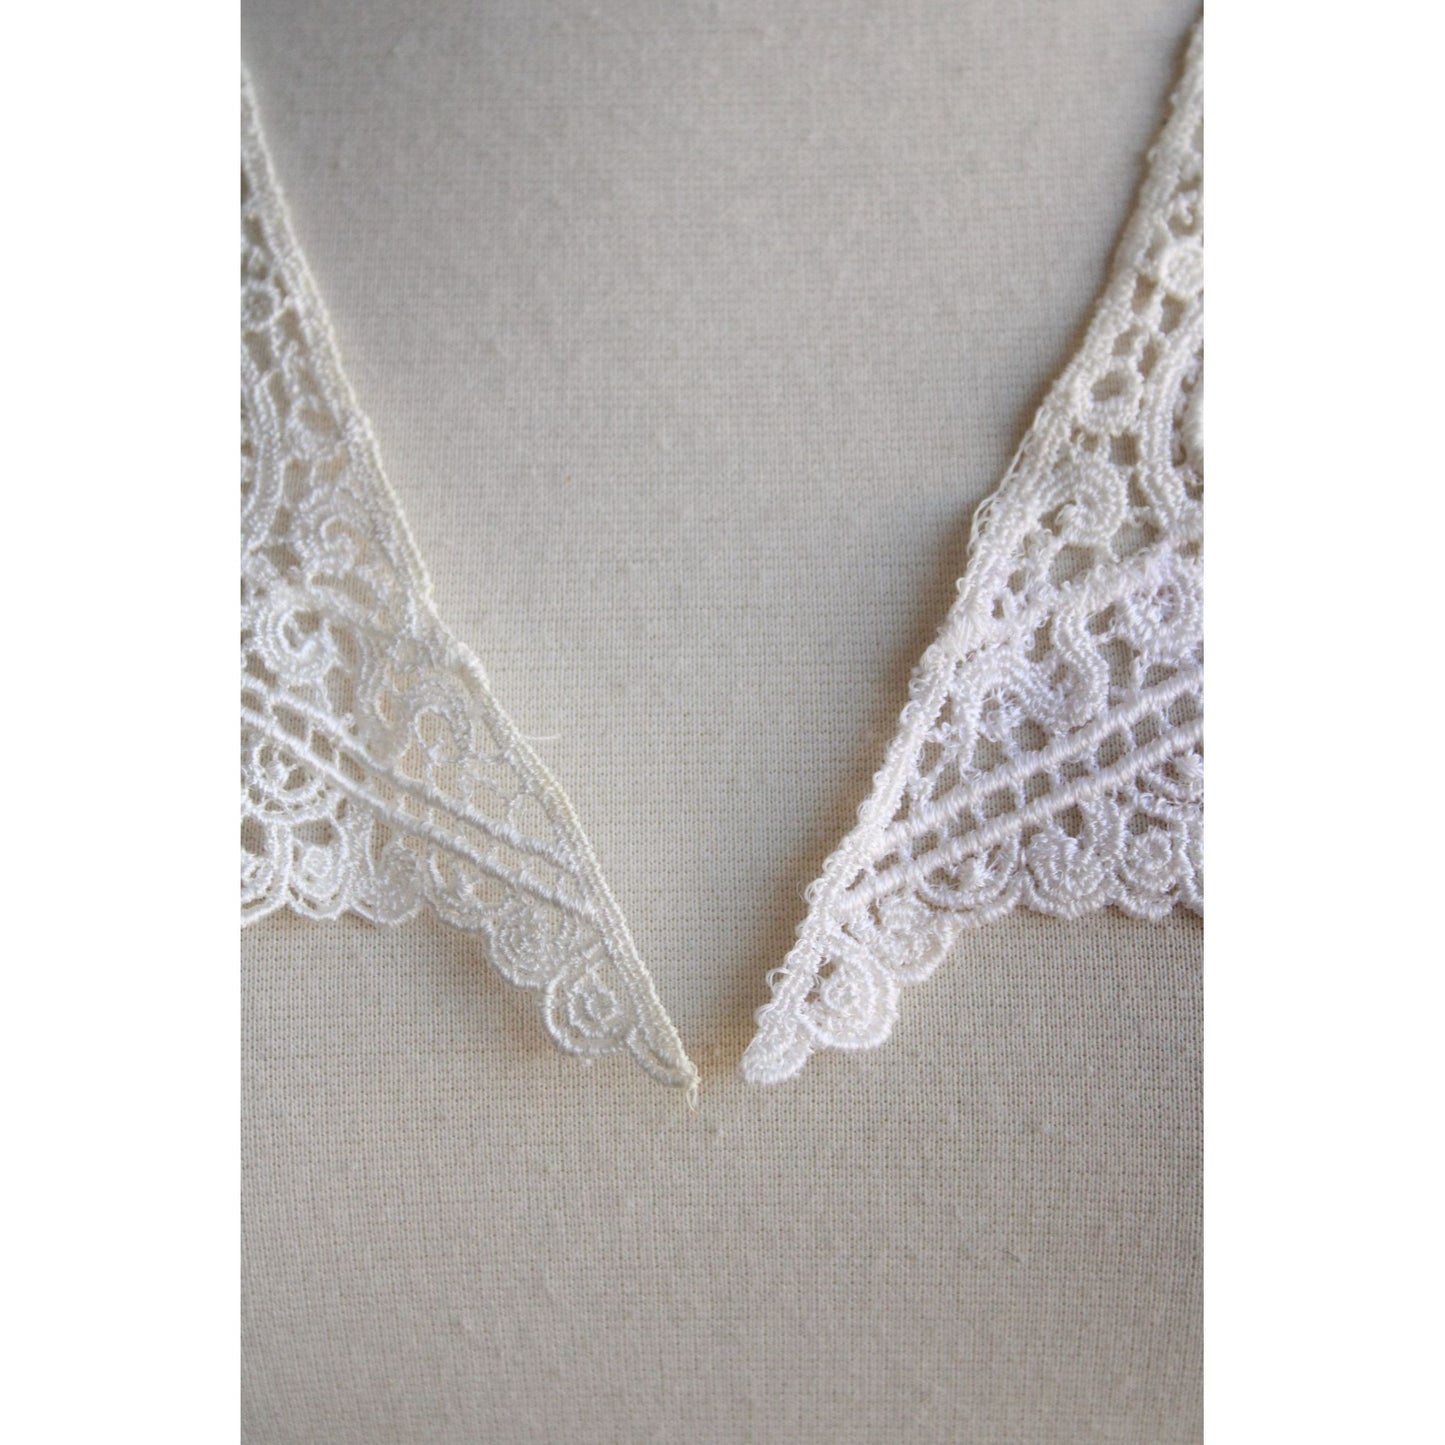 Vintage Pair of 12" Long Collar Ivory Lace Appliques